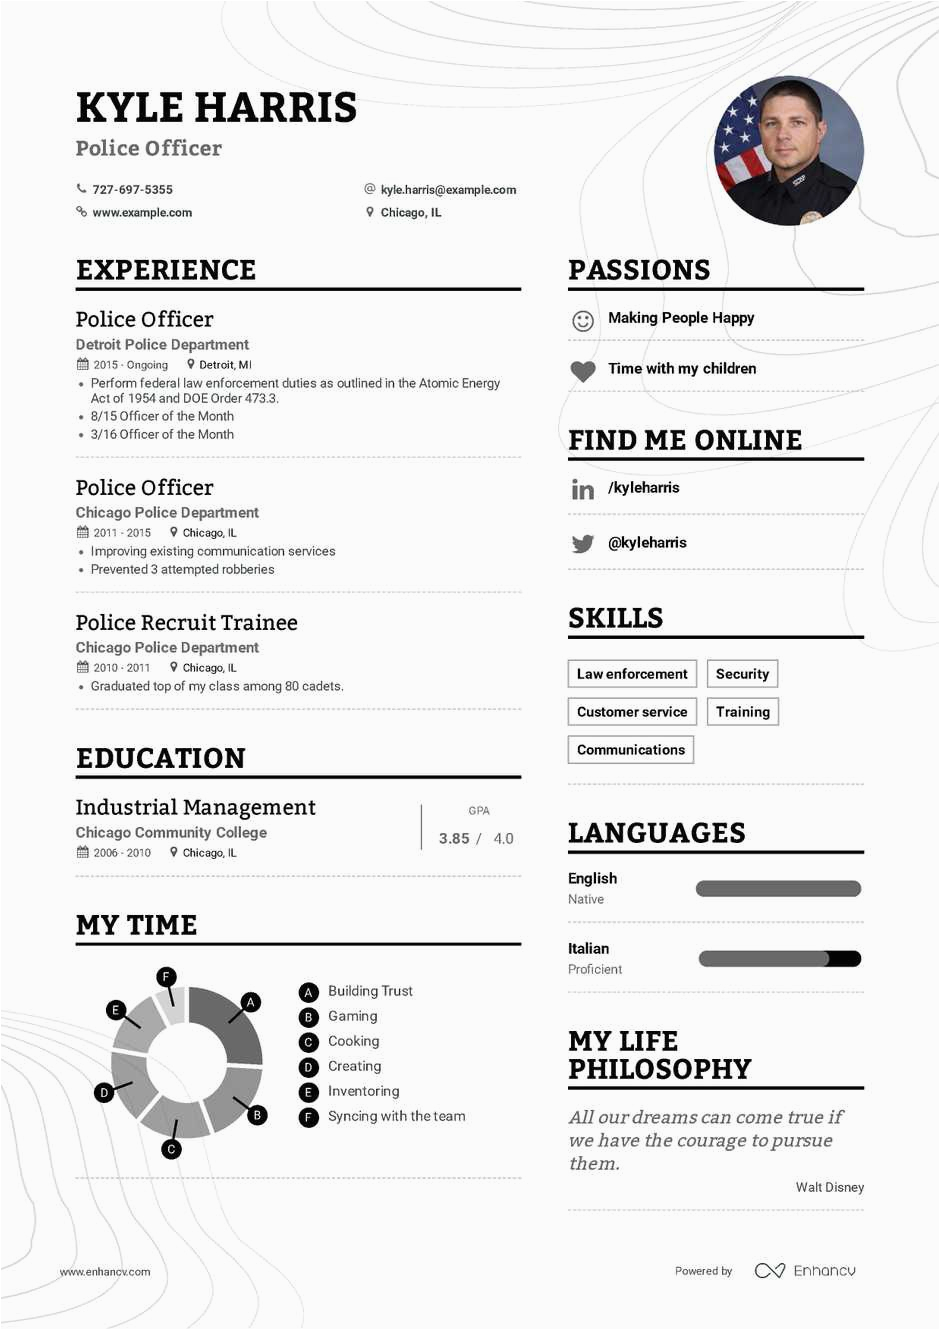 Sample Resume for Police Officer Job Cfo Resume Example and Guide for 2019